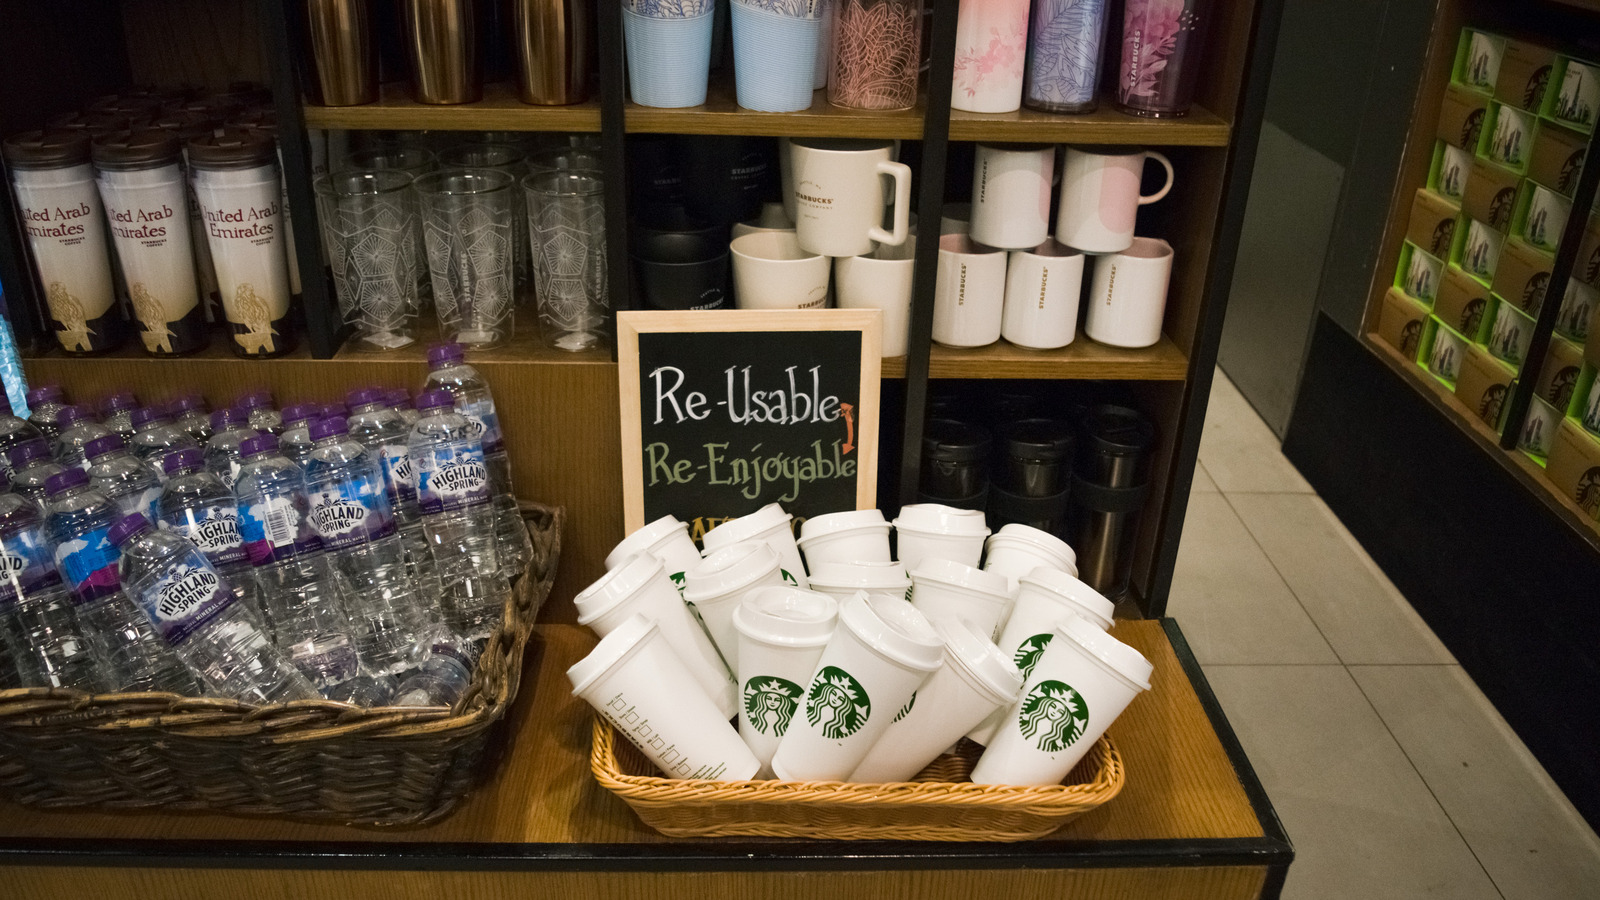 Starbucks reusable cup giveaway returns, here's what you need to know